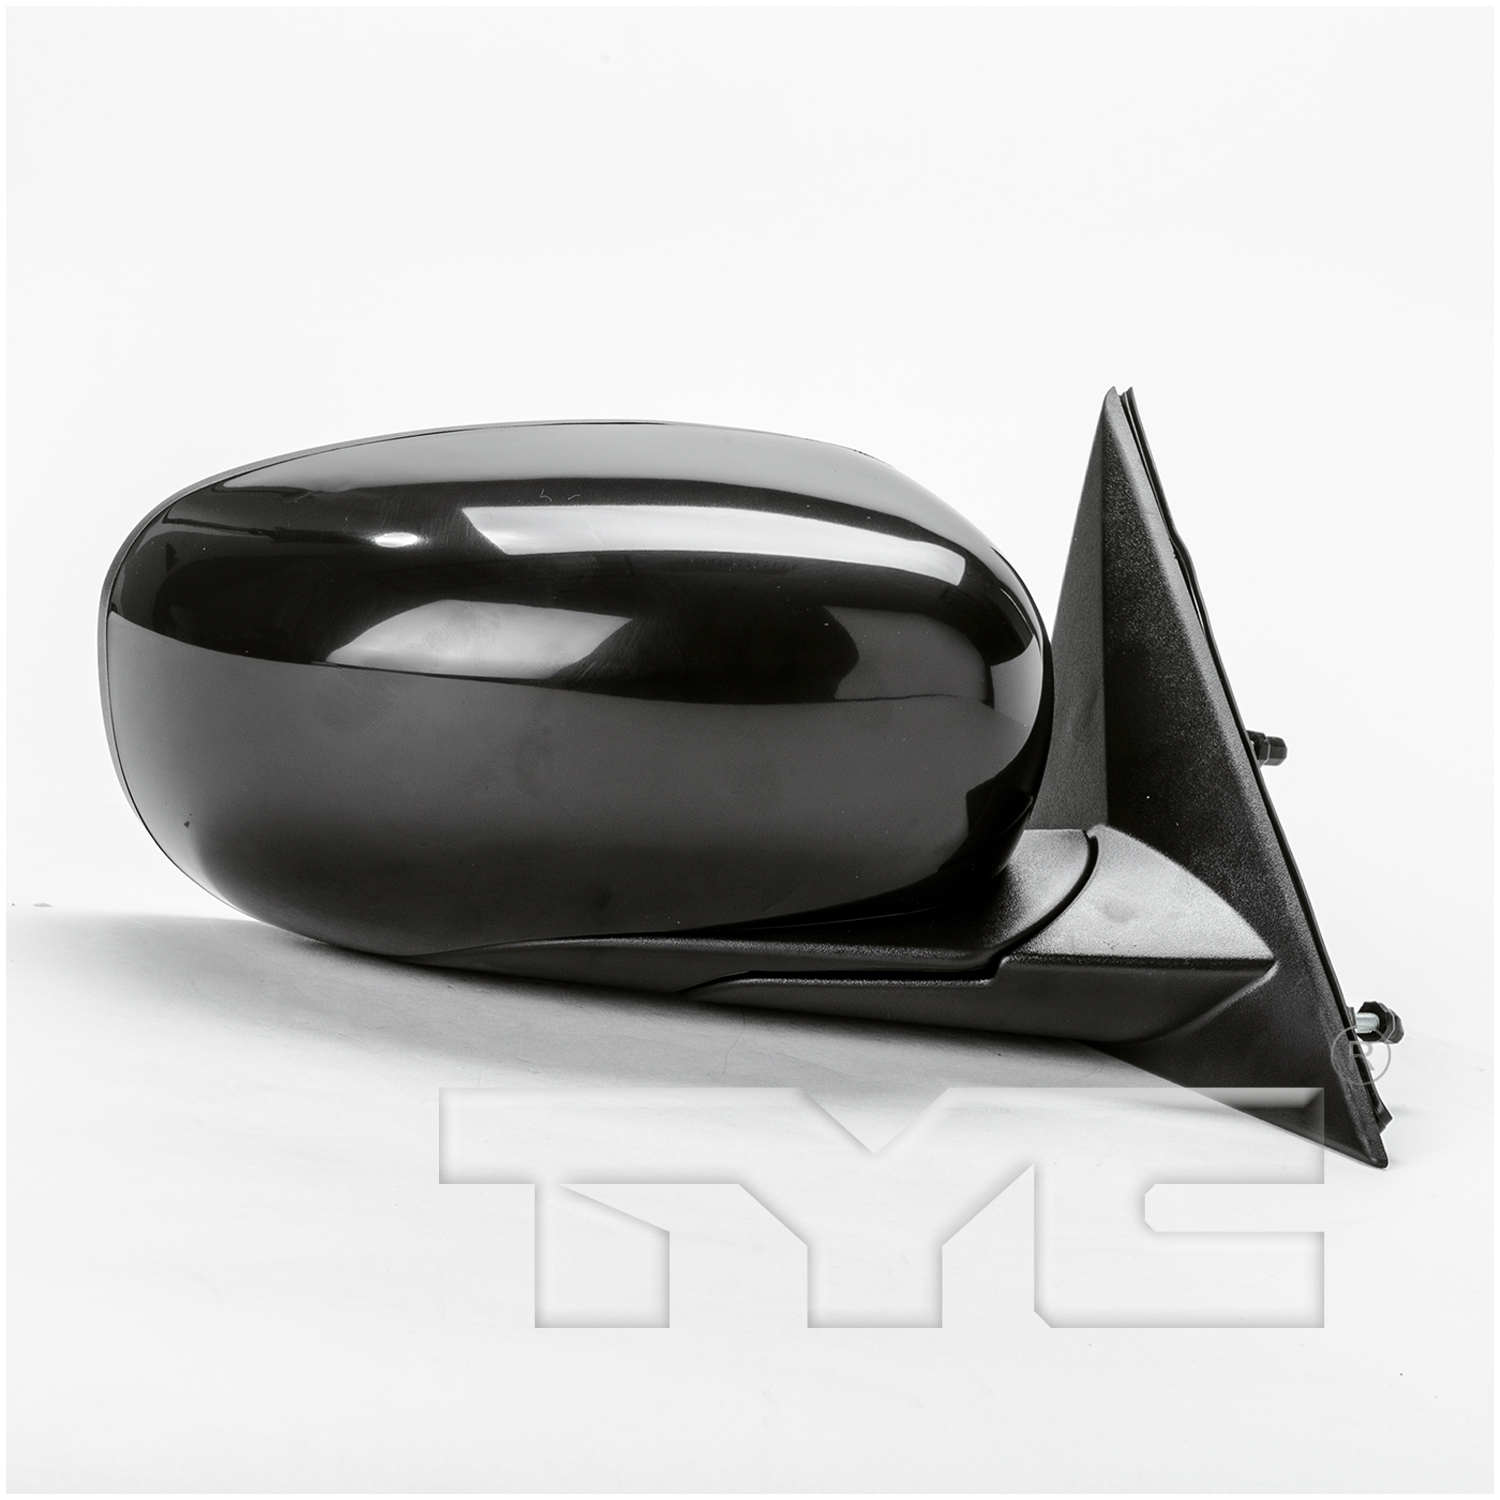 Aftermarket MIRRORS for CHRYSLER - 300, 300,05-08,RT Mirror outside rear view